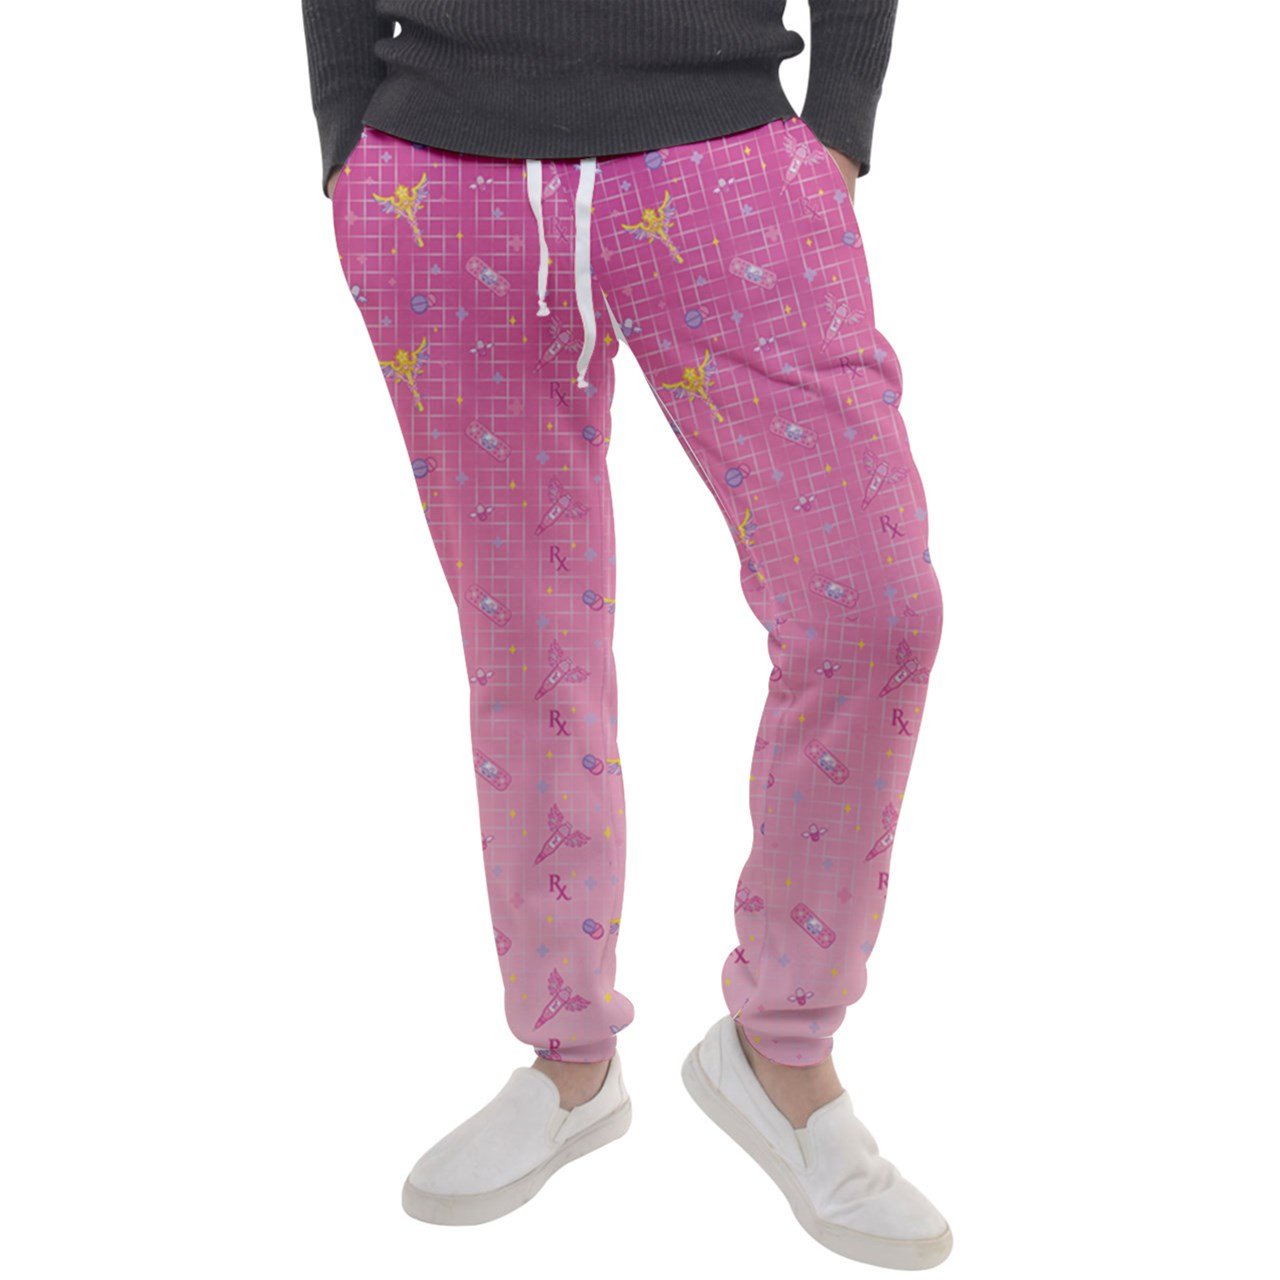 Magical Girl First Aid Sweatpants in Pink - Lolita Collective